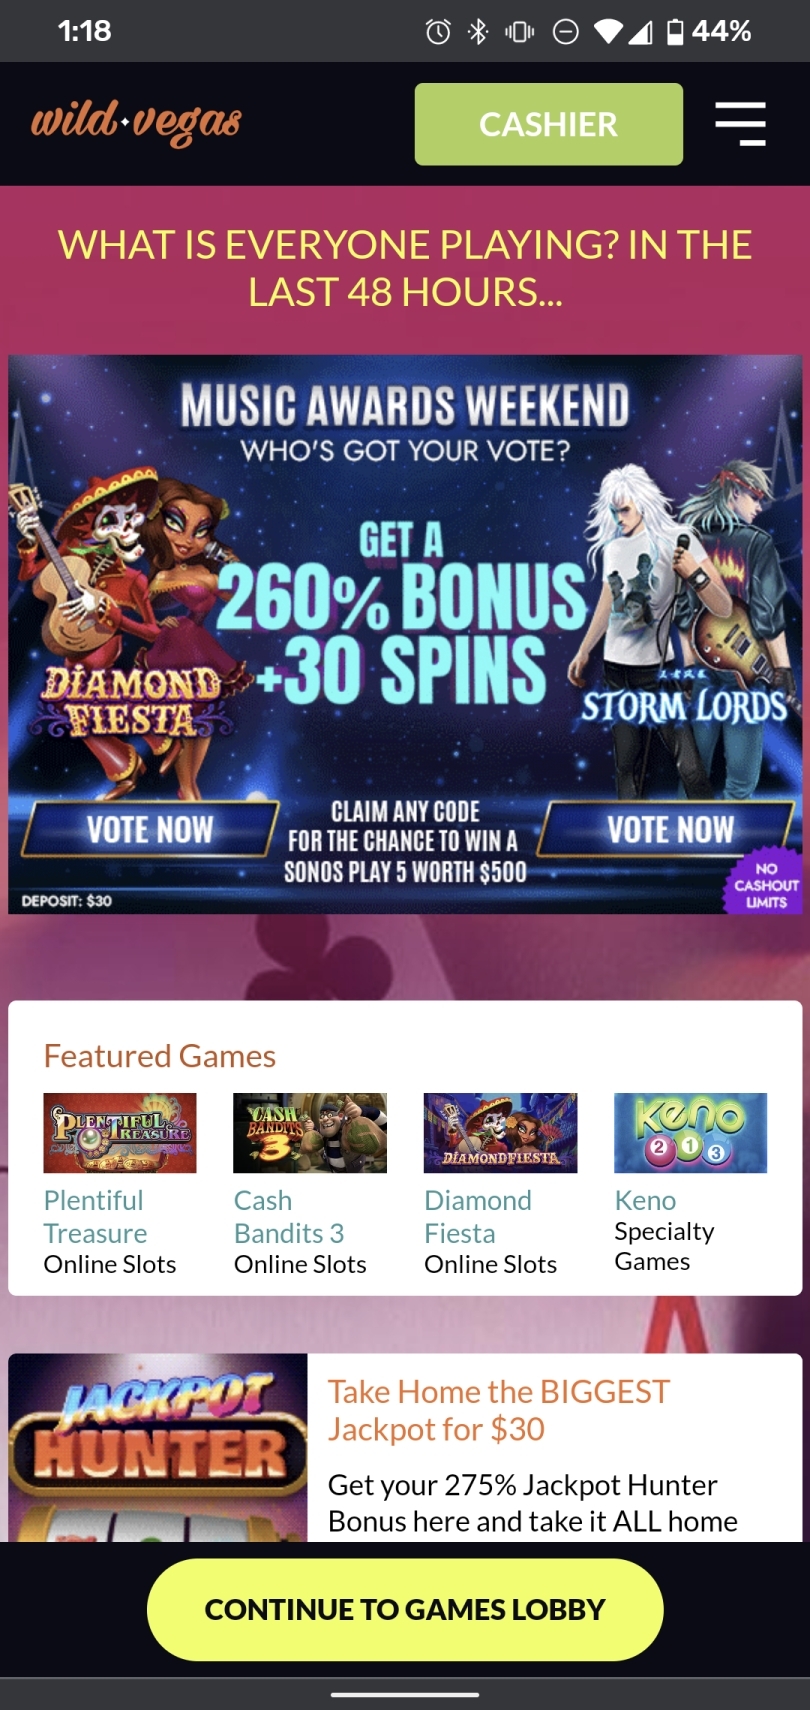 Wcasino: 20 free spins without deposit spicycasinos